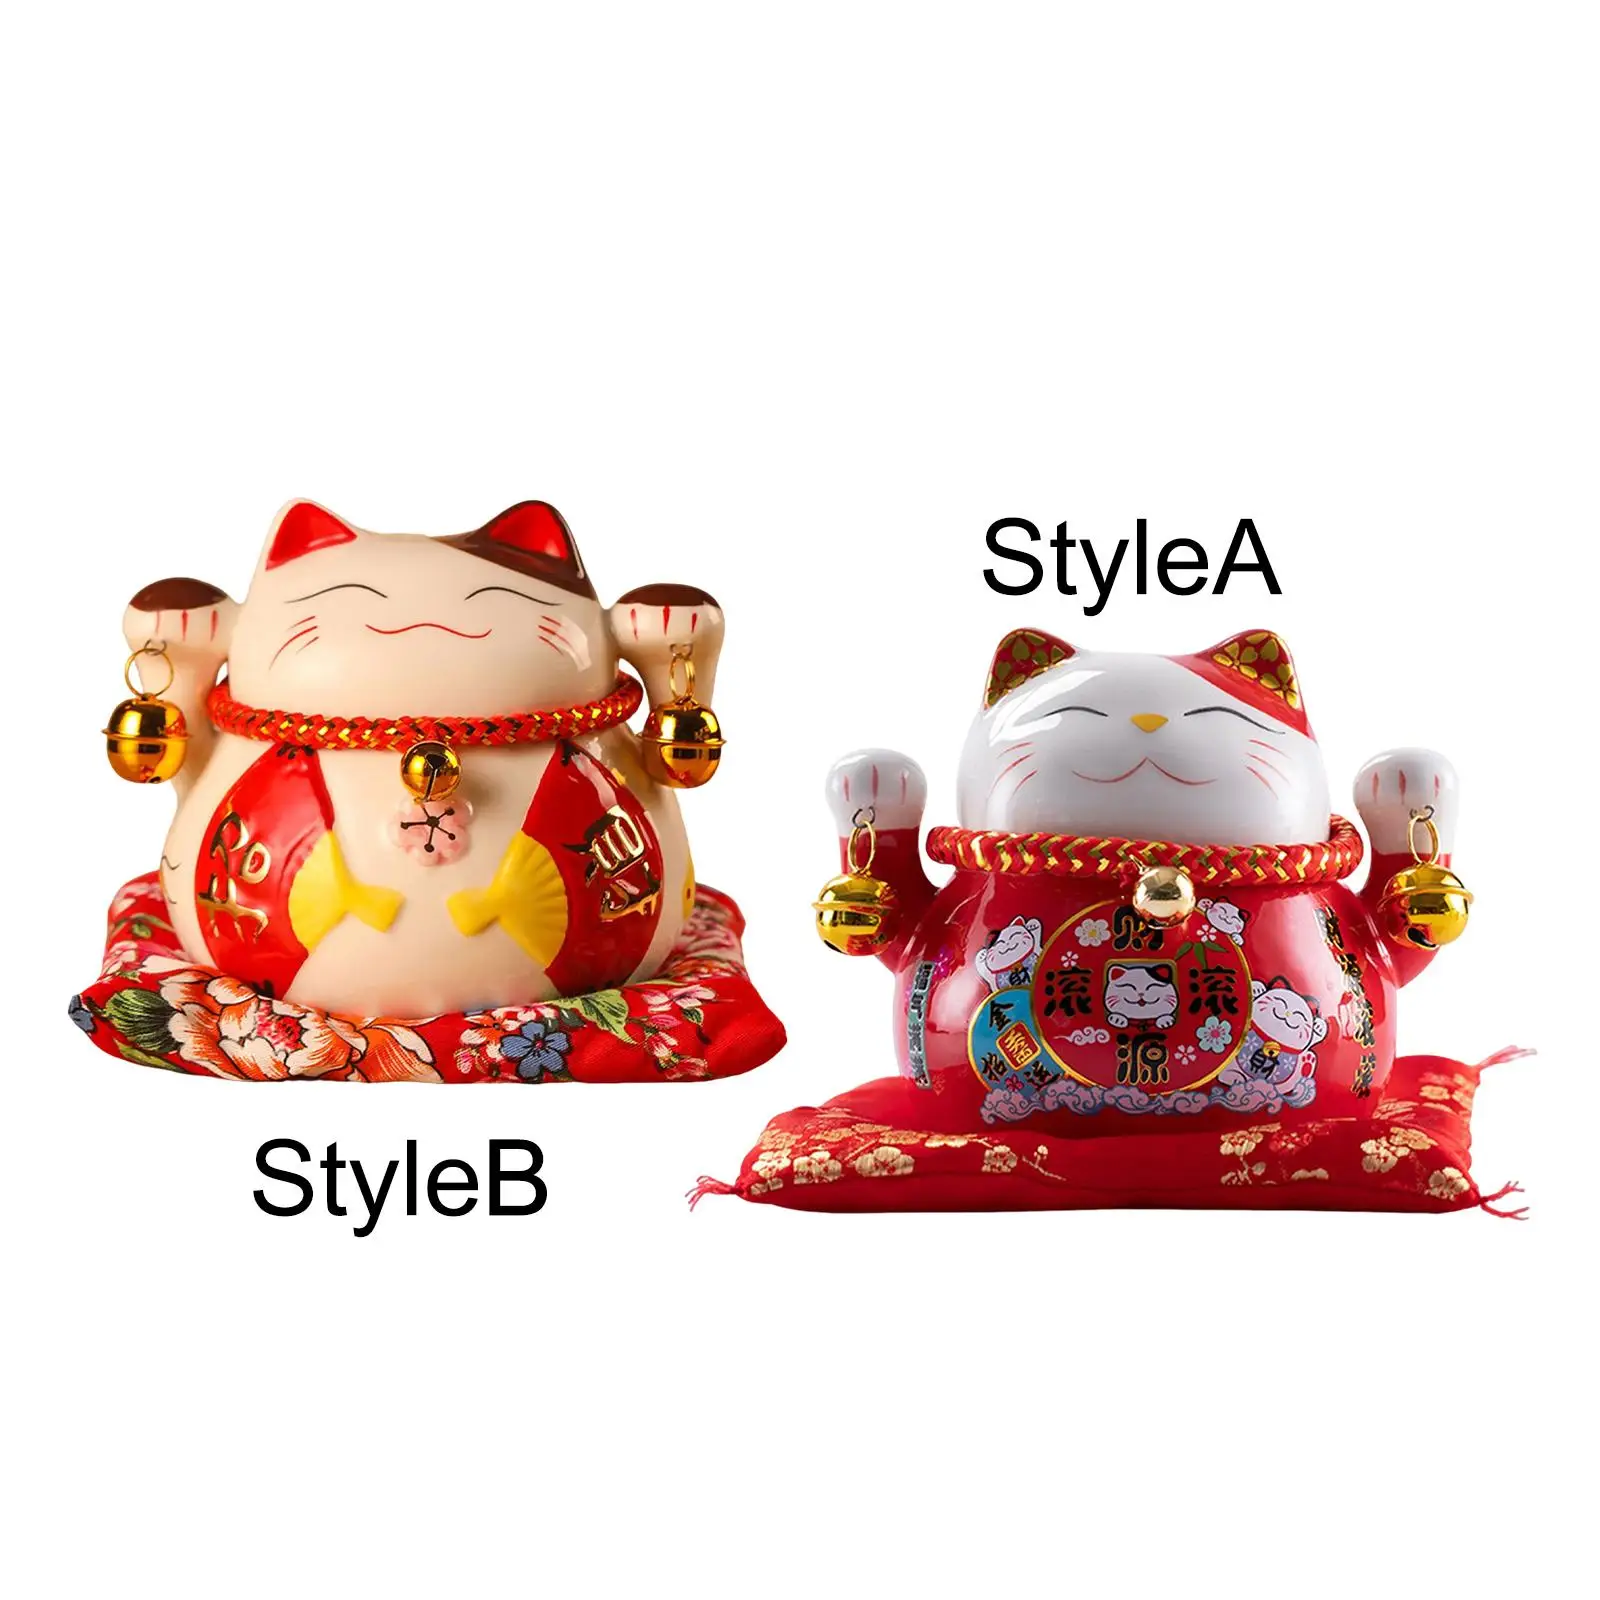 Lucky Cat Money Bank Ceramic Ornament Animal Statue for Table Decoration